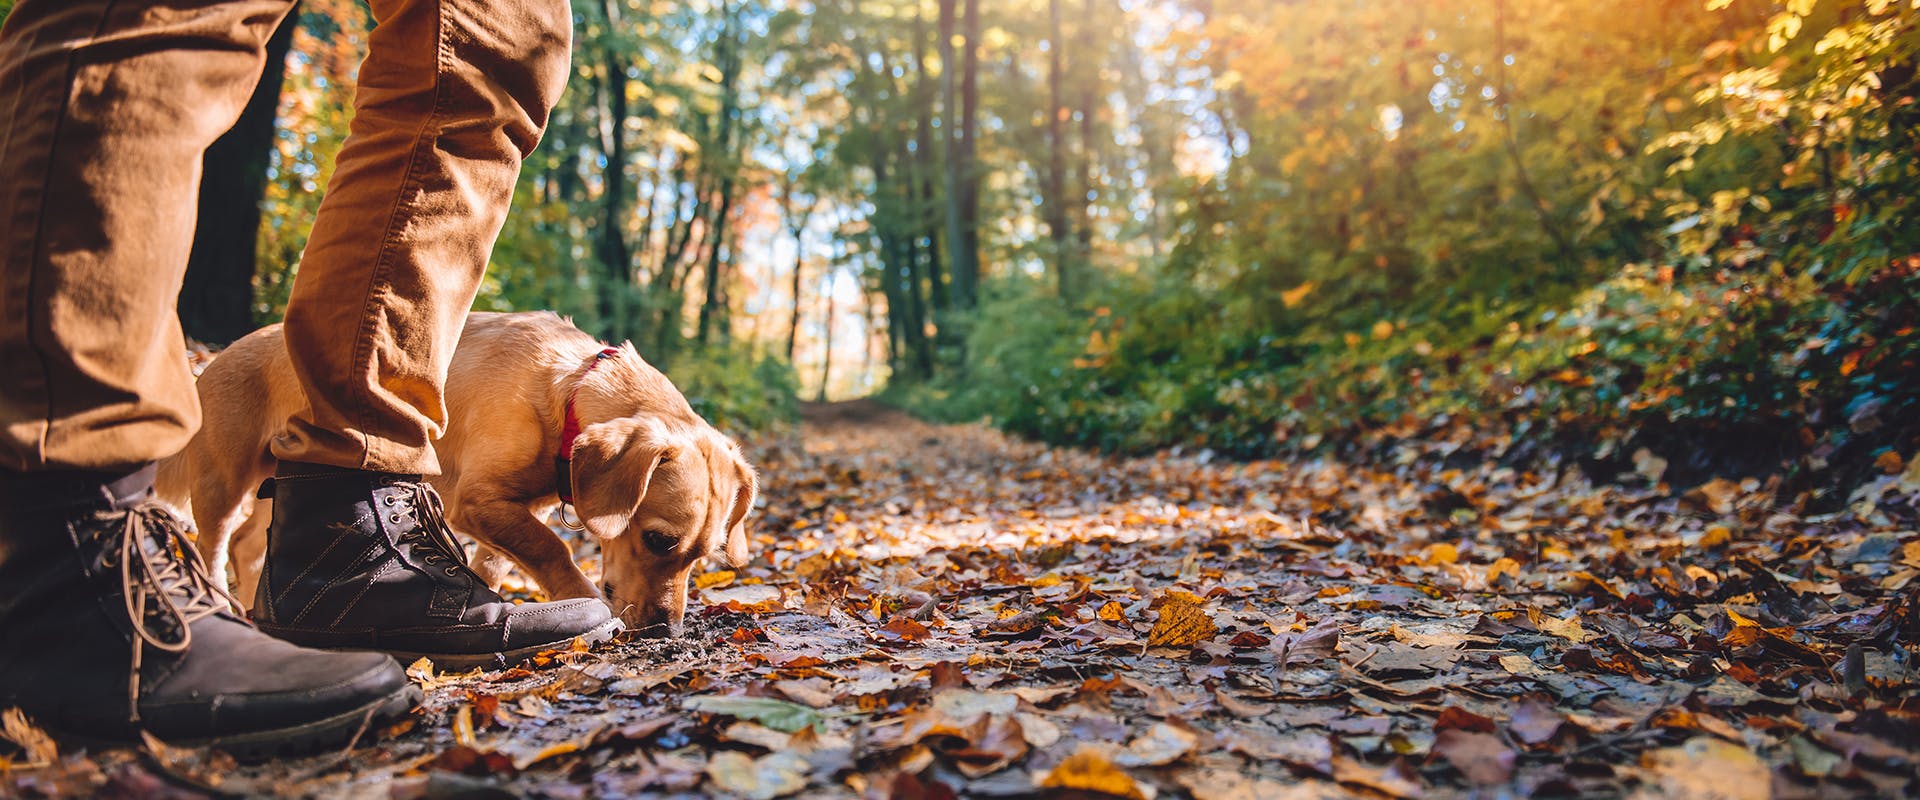 A person and their dog out for a walk in the forest, the dog sniffing at fallen autumn leaves